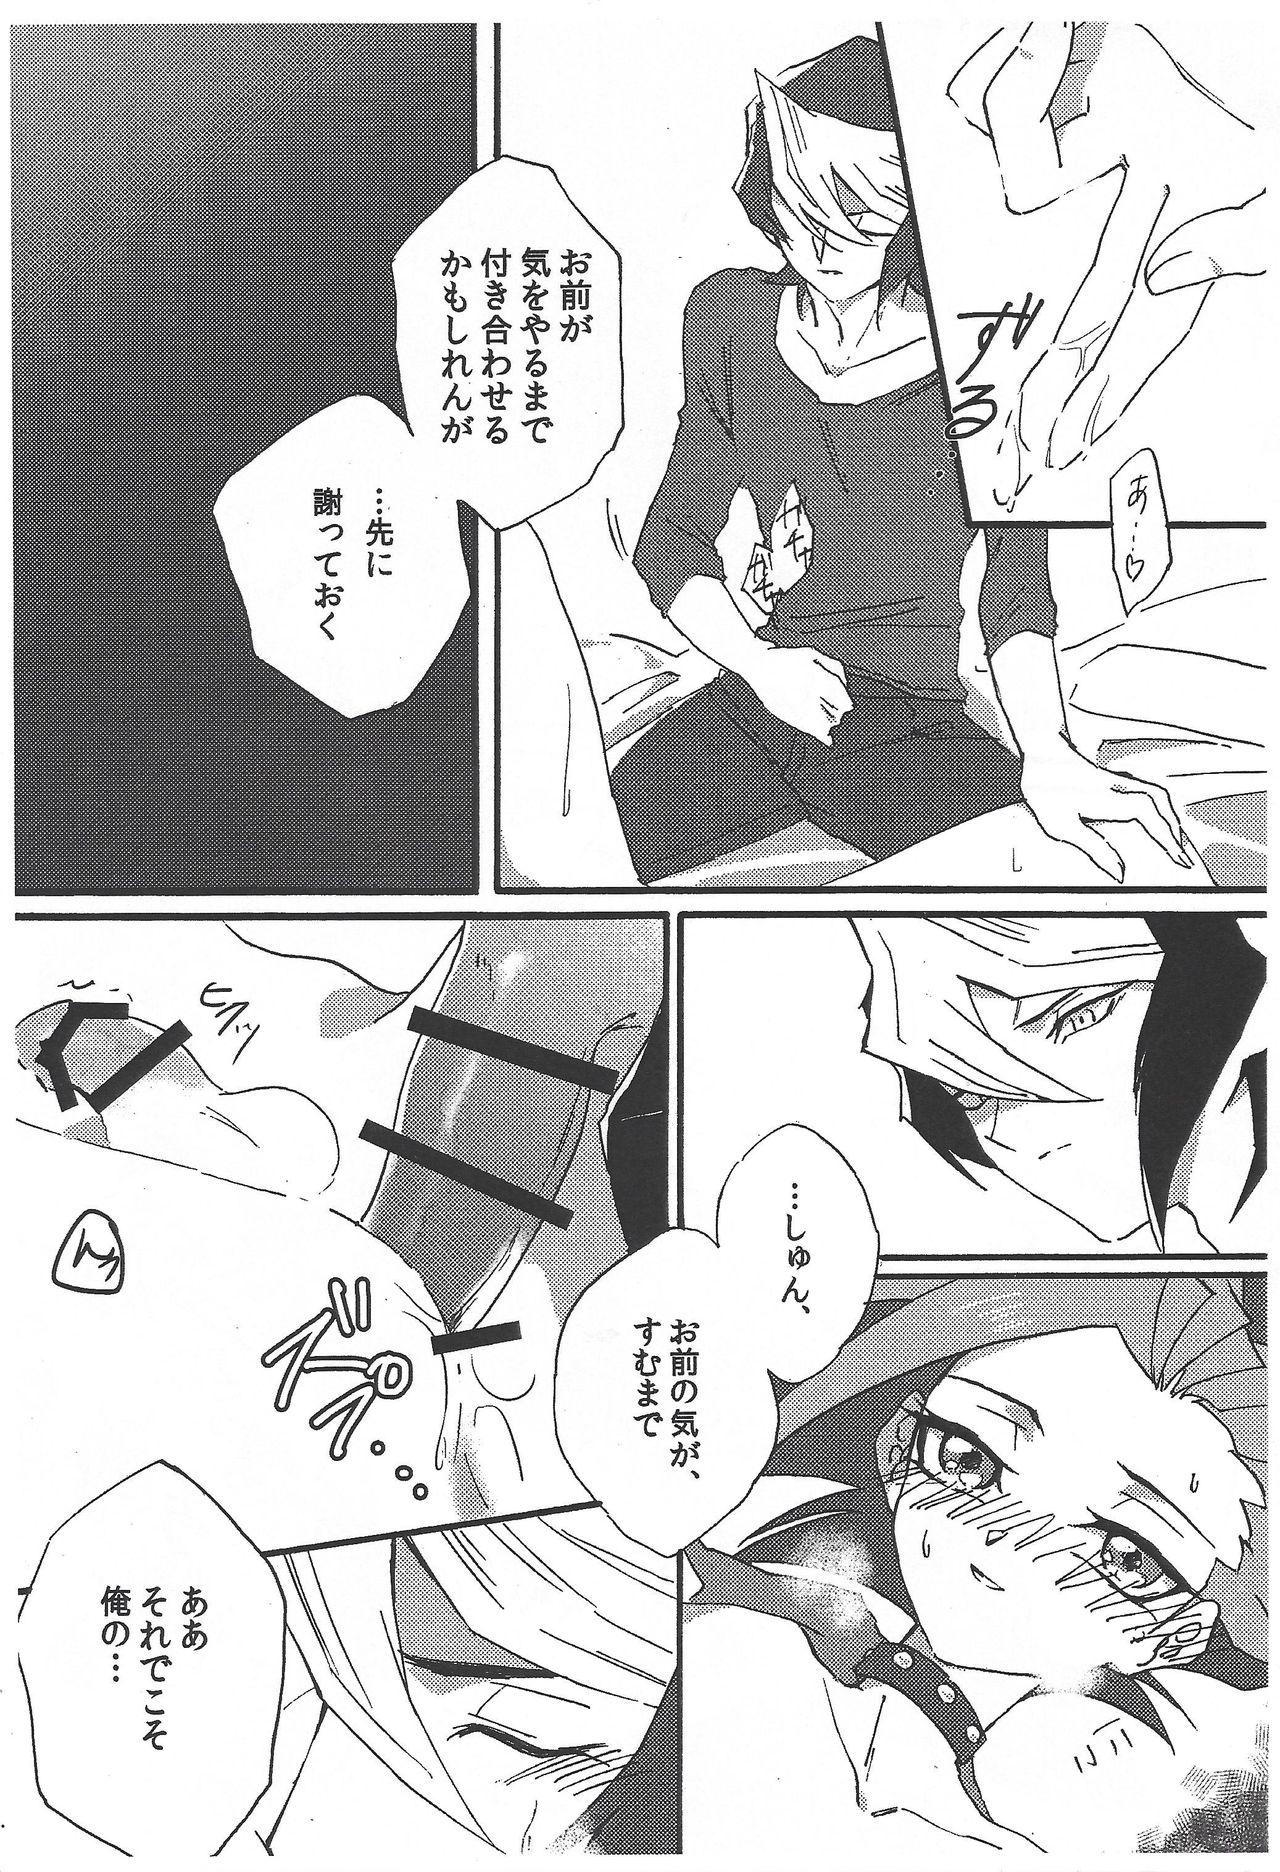 T Girl GHOST ROOM - Yu gi oh arc v Boss - Page 8